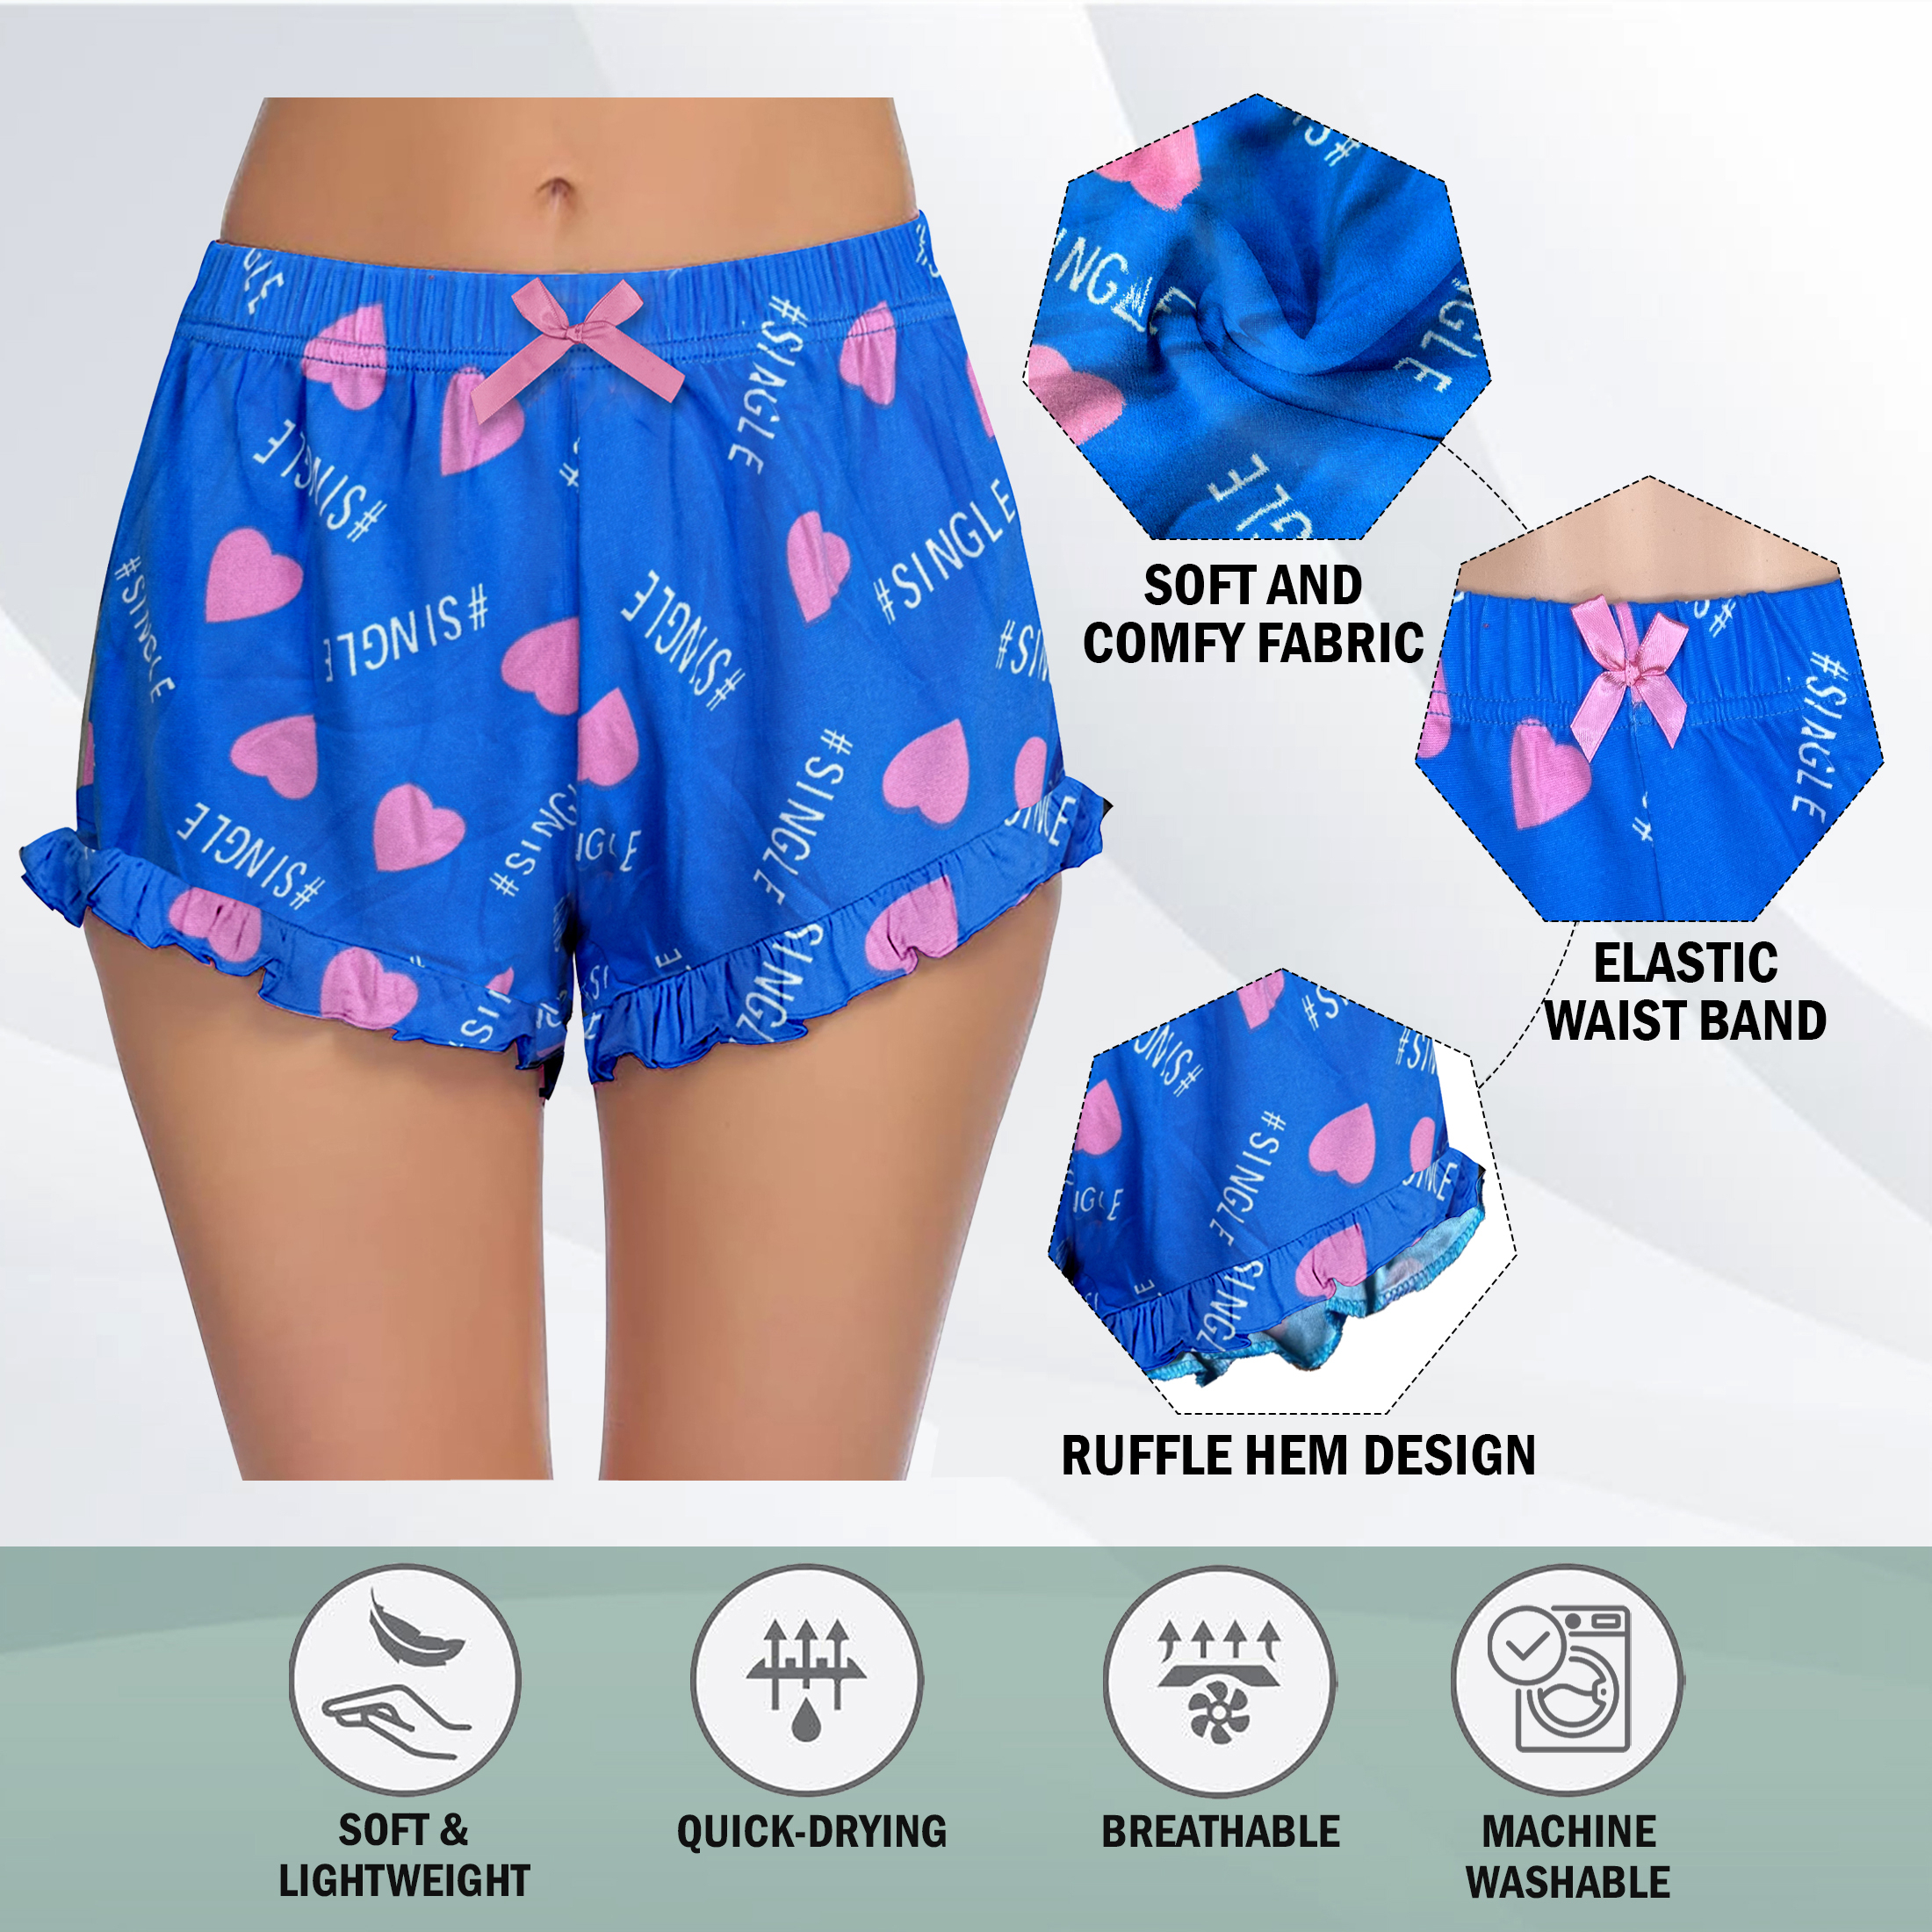 6-Pack Women's Casual Printed Pajama Shorts Soft Stretchy Relaxed Fit Ladies Summer Yoga Bottoms - L